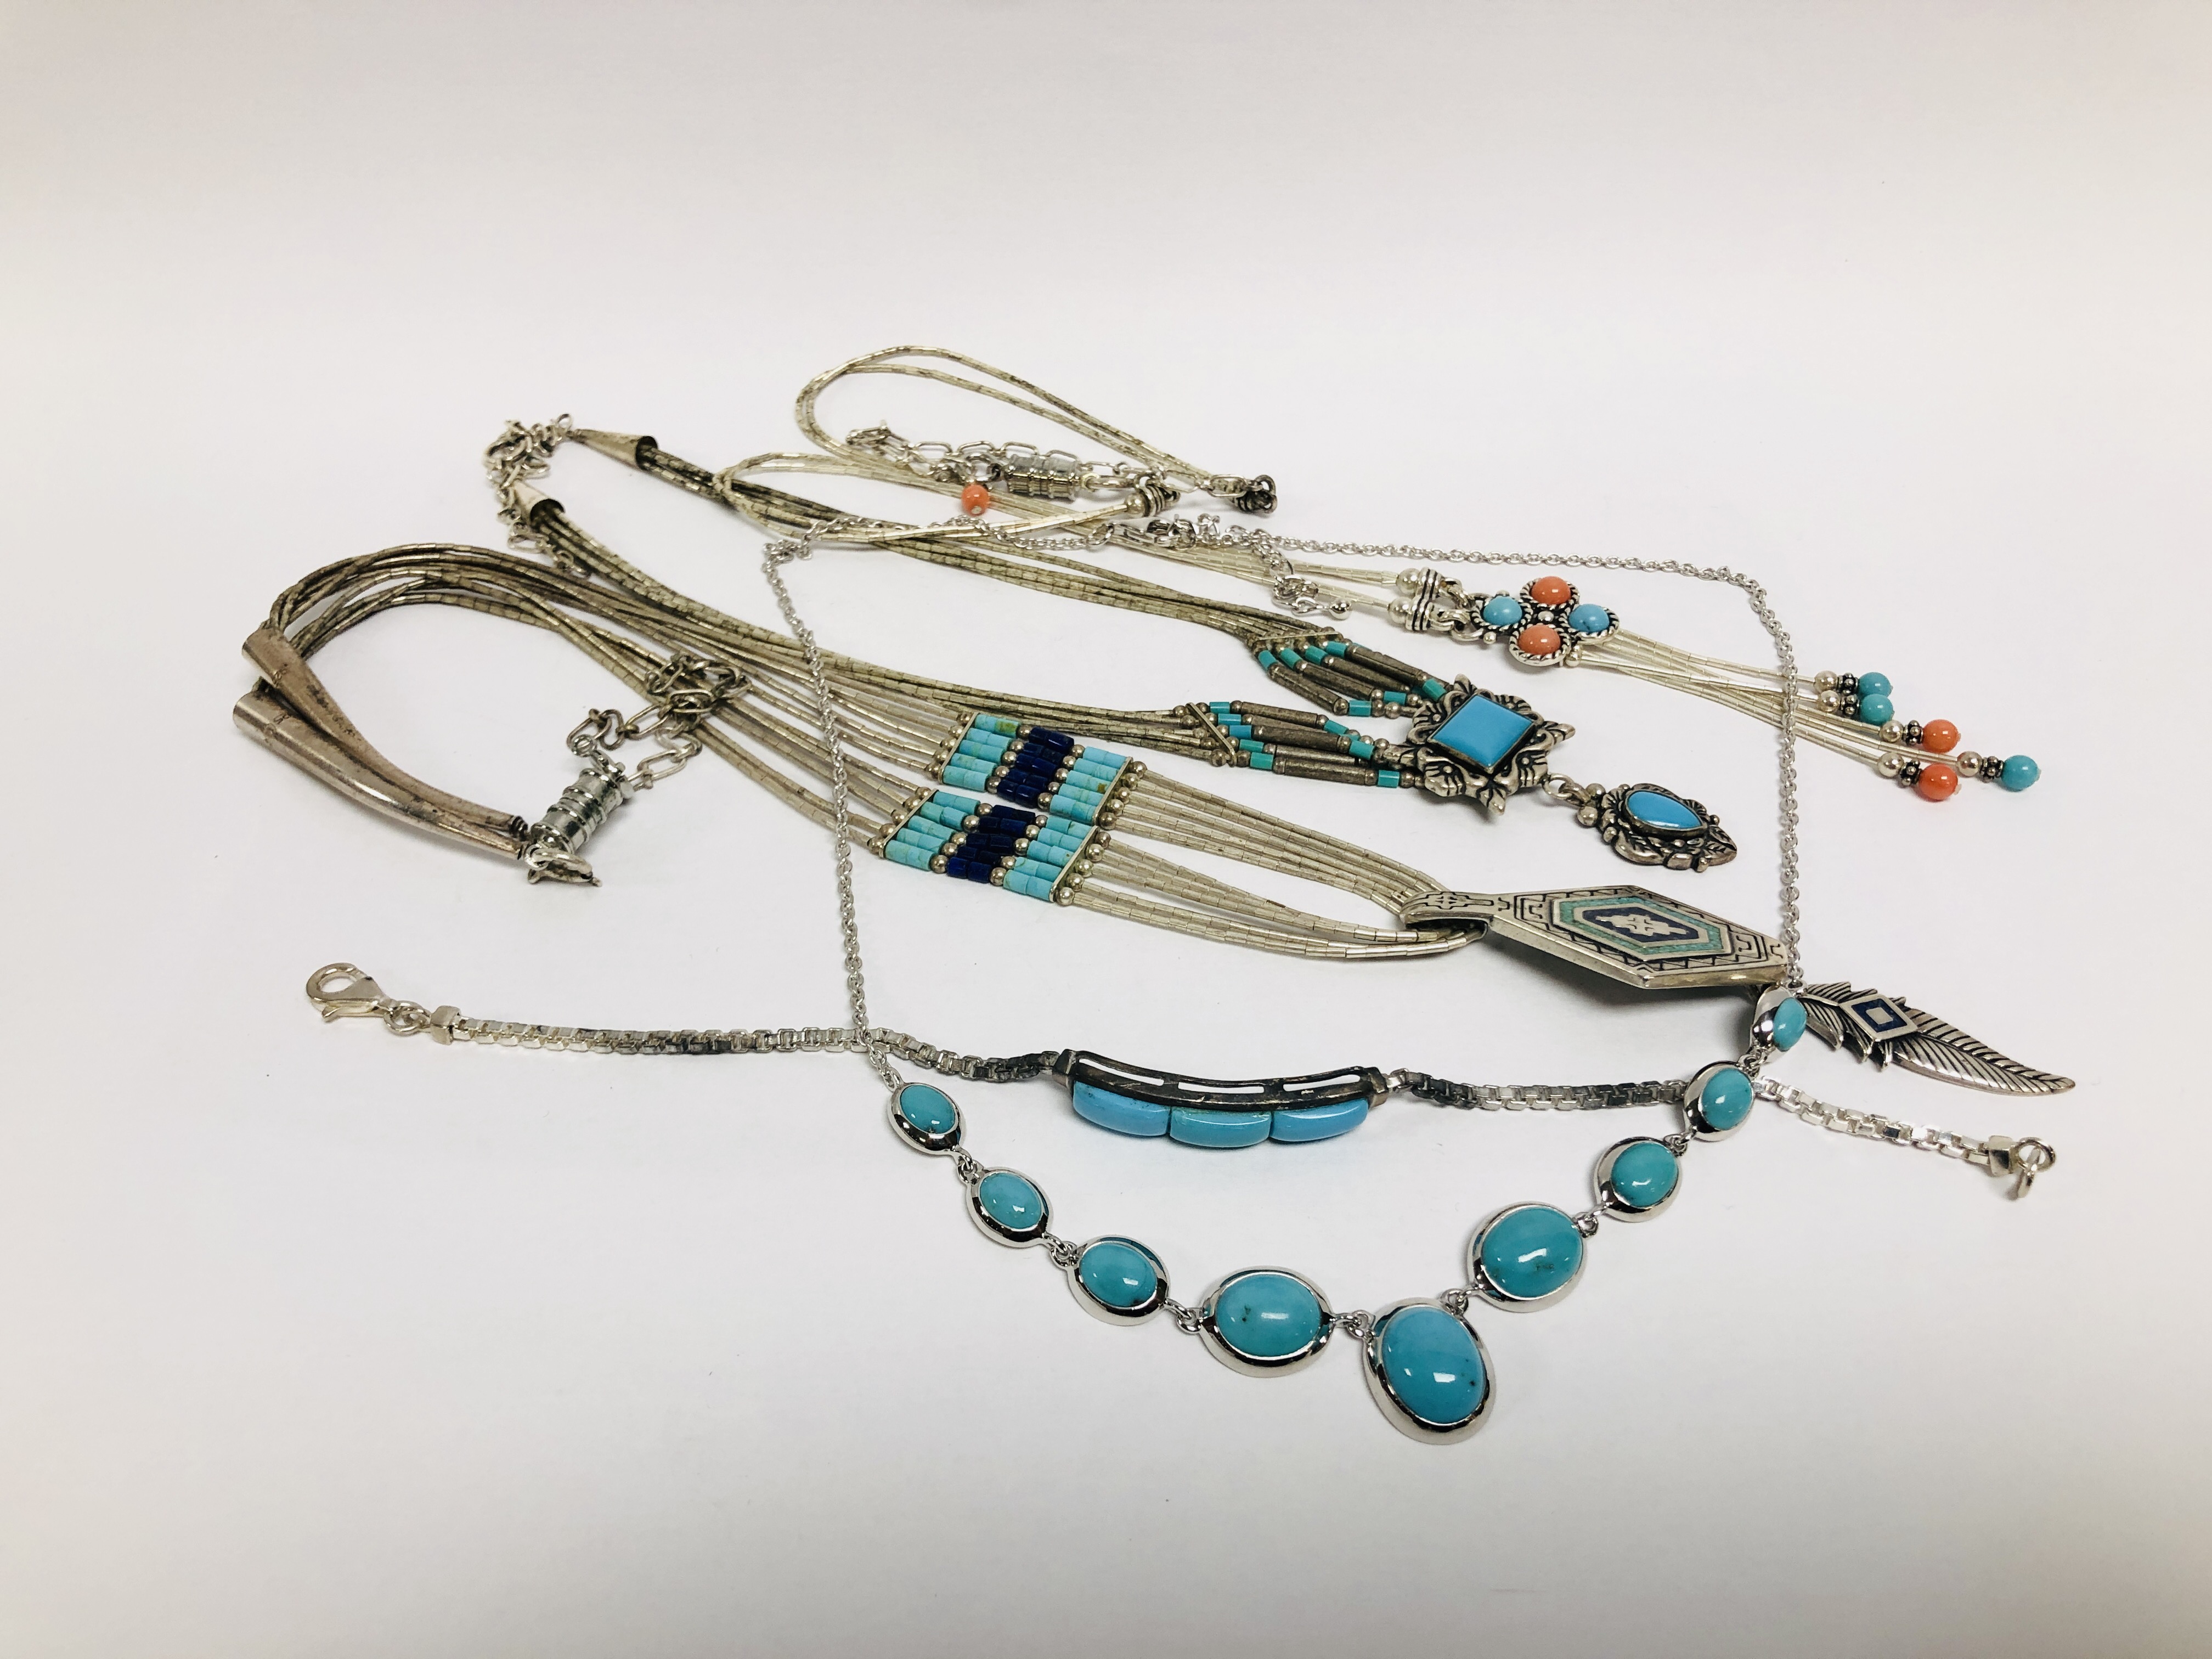 3 X SILVER SOUTH AMERICAN MULTI STRAND NECKLACES WITH BEADED AND ENAMELLED DETAIL ALONG WITH A